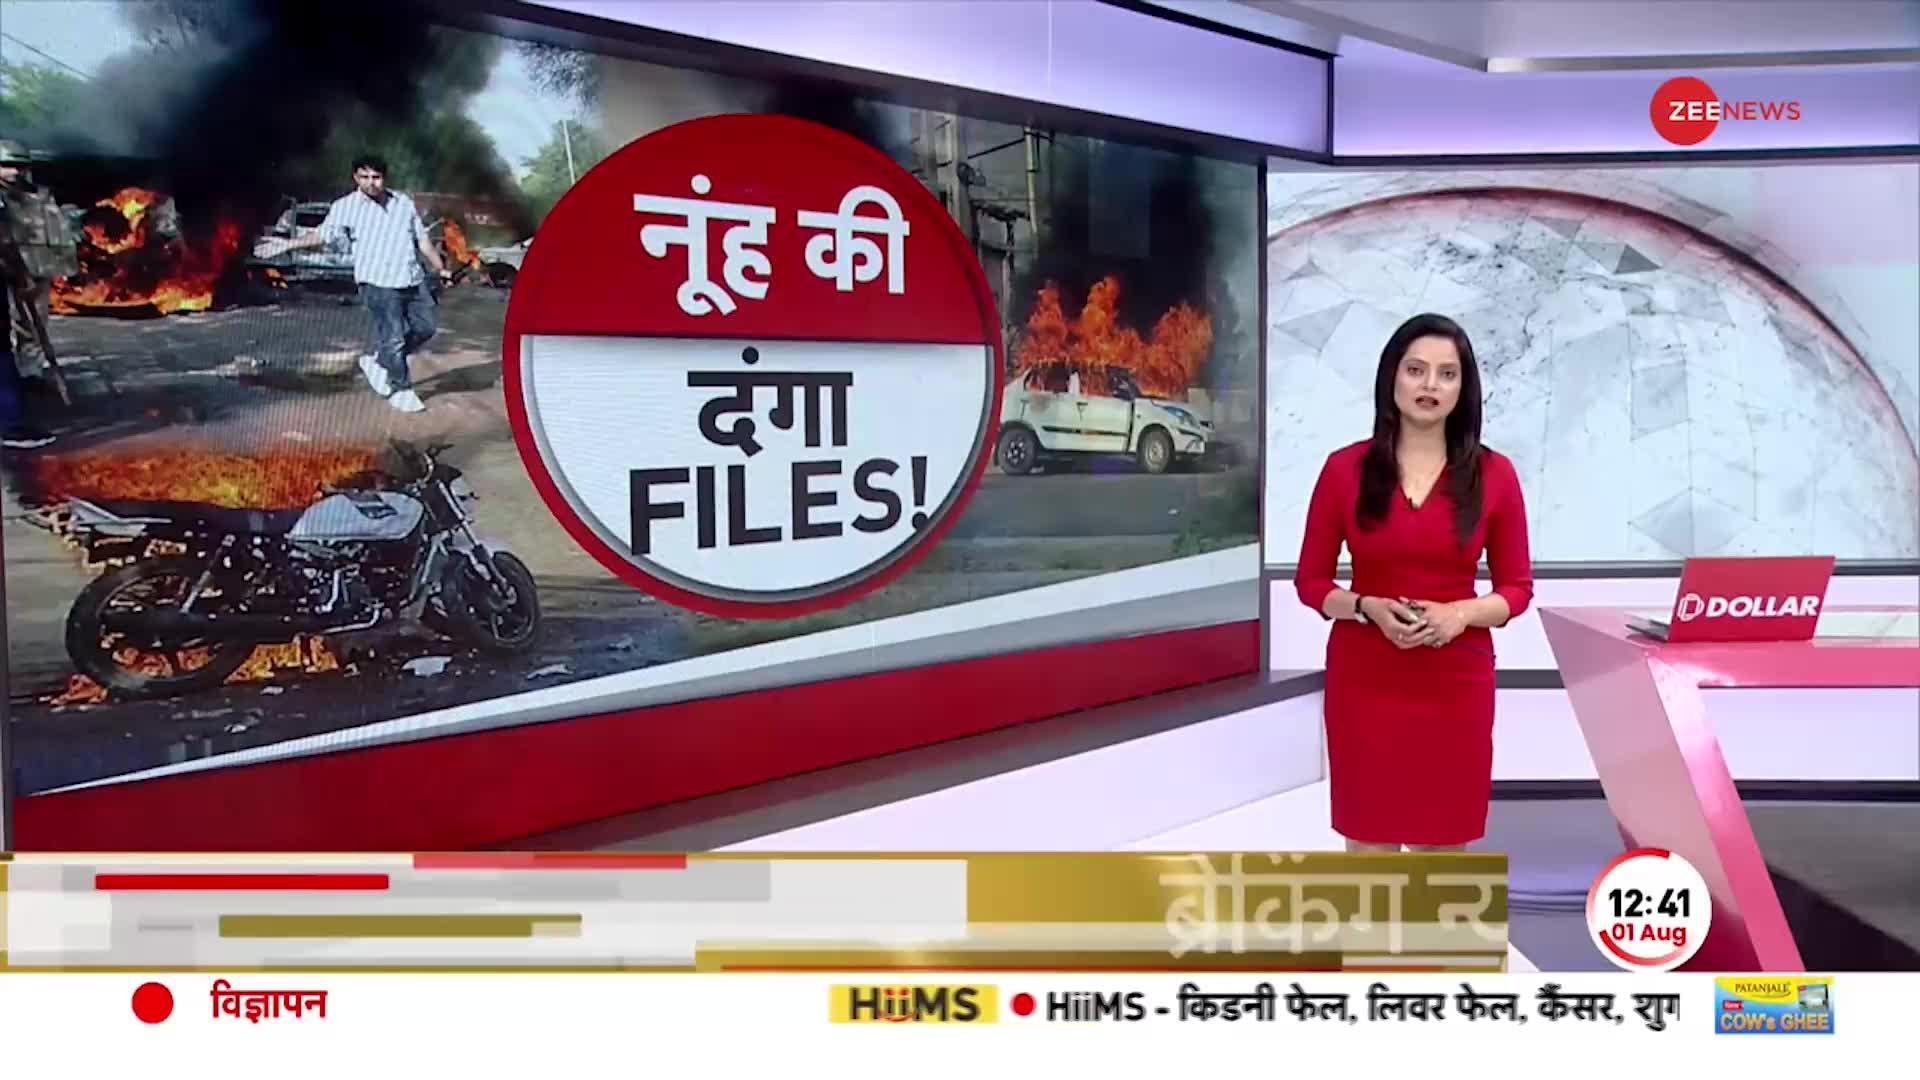 Watch Zee News' ground report from Nuh